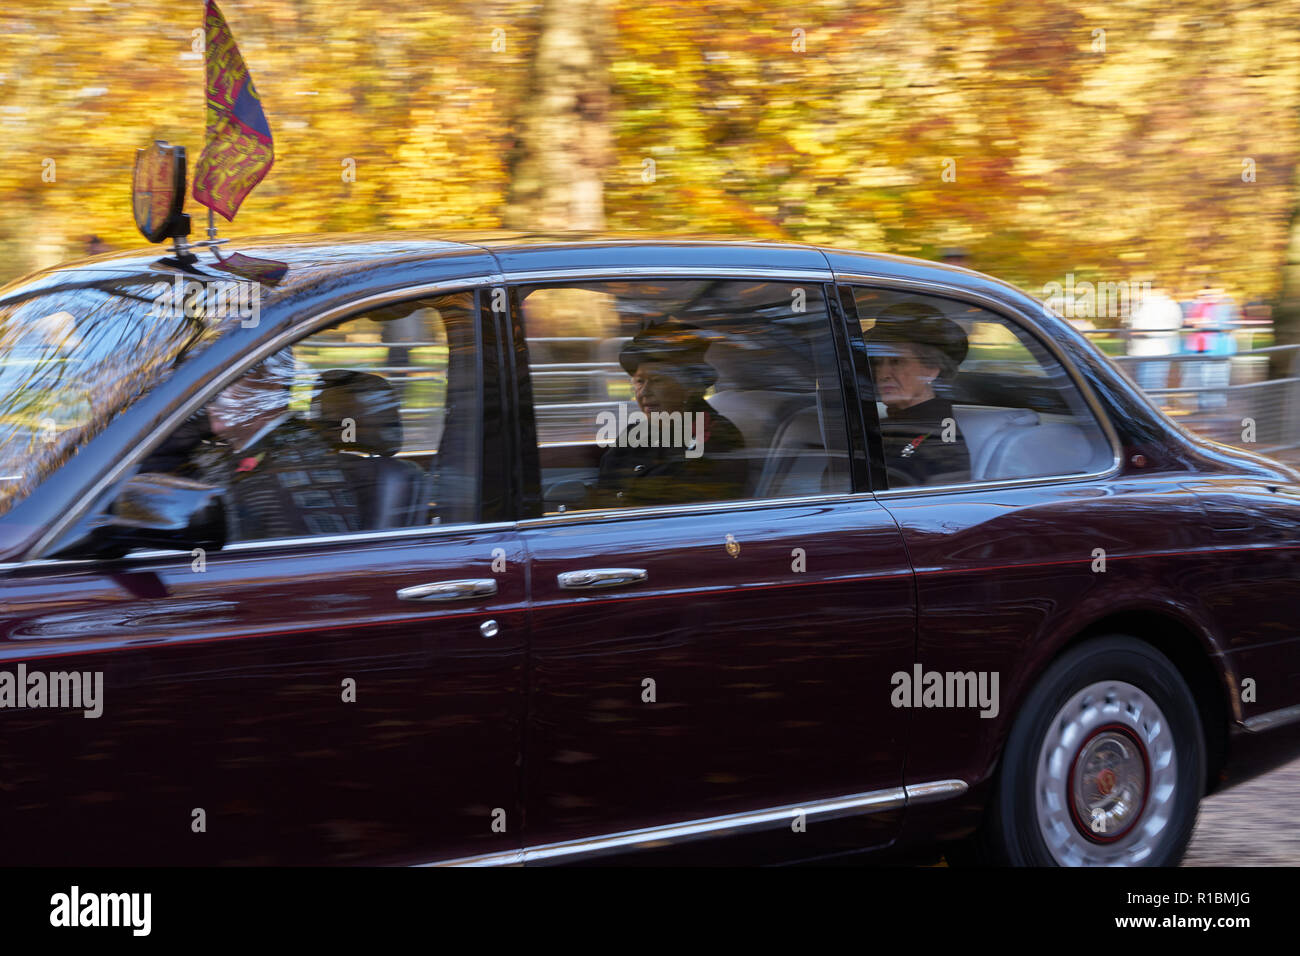 London, UK. 11th Nov, 2018. Queen Elizabeth II photographed following the rememberence day celebrations in London 11/11/18 Here she is photographed on her way to Buckingham palace Credit: Angus Grant/Alamy Live News Stock Photo